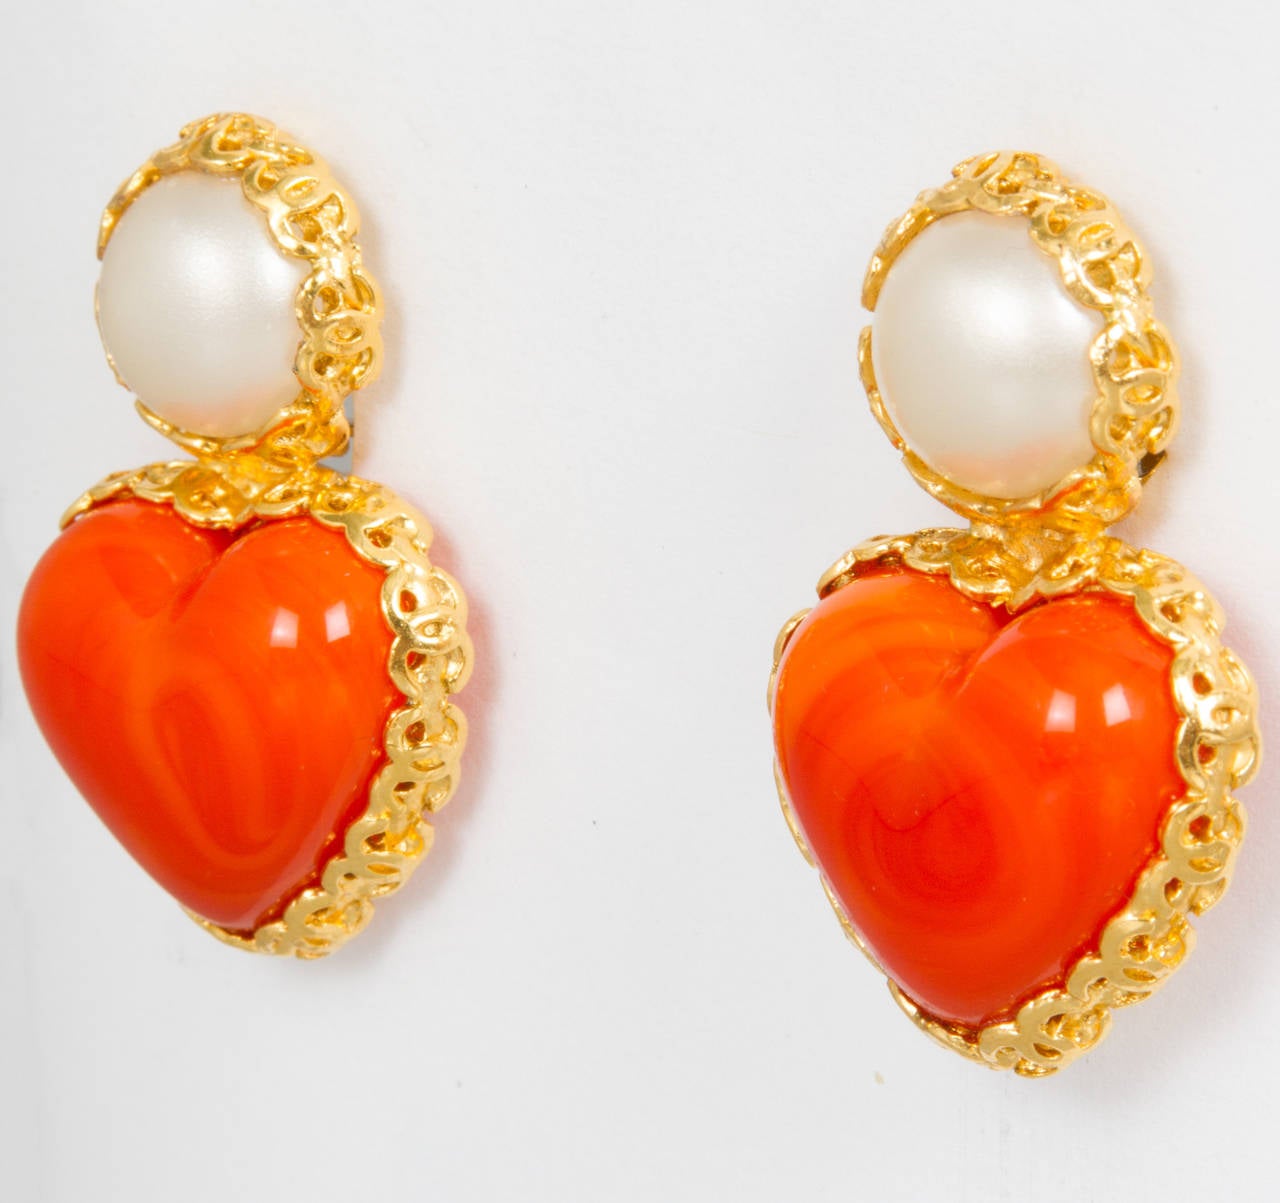 These are a nice wearable pair of earrings. Love the orange and pearl combination.